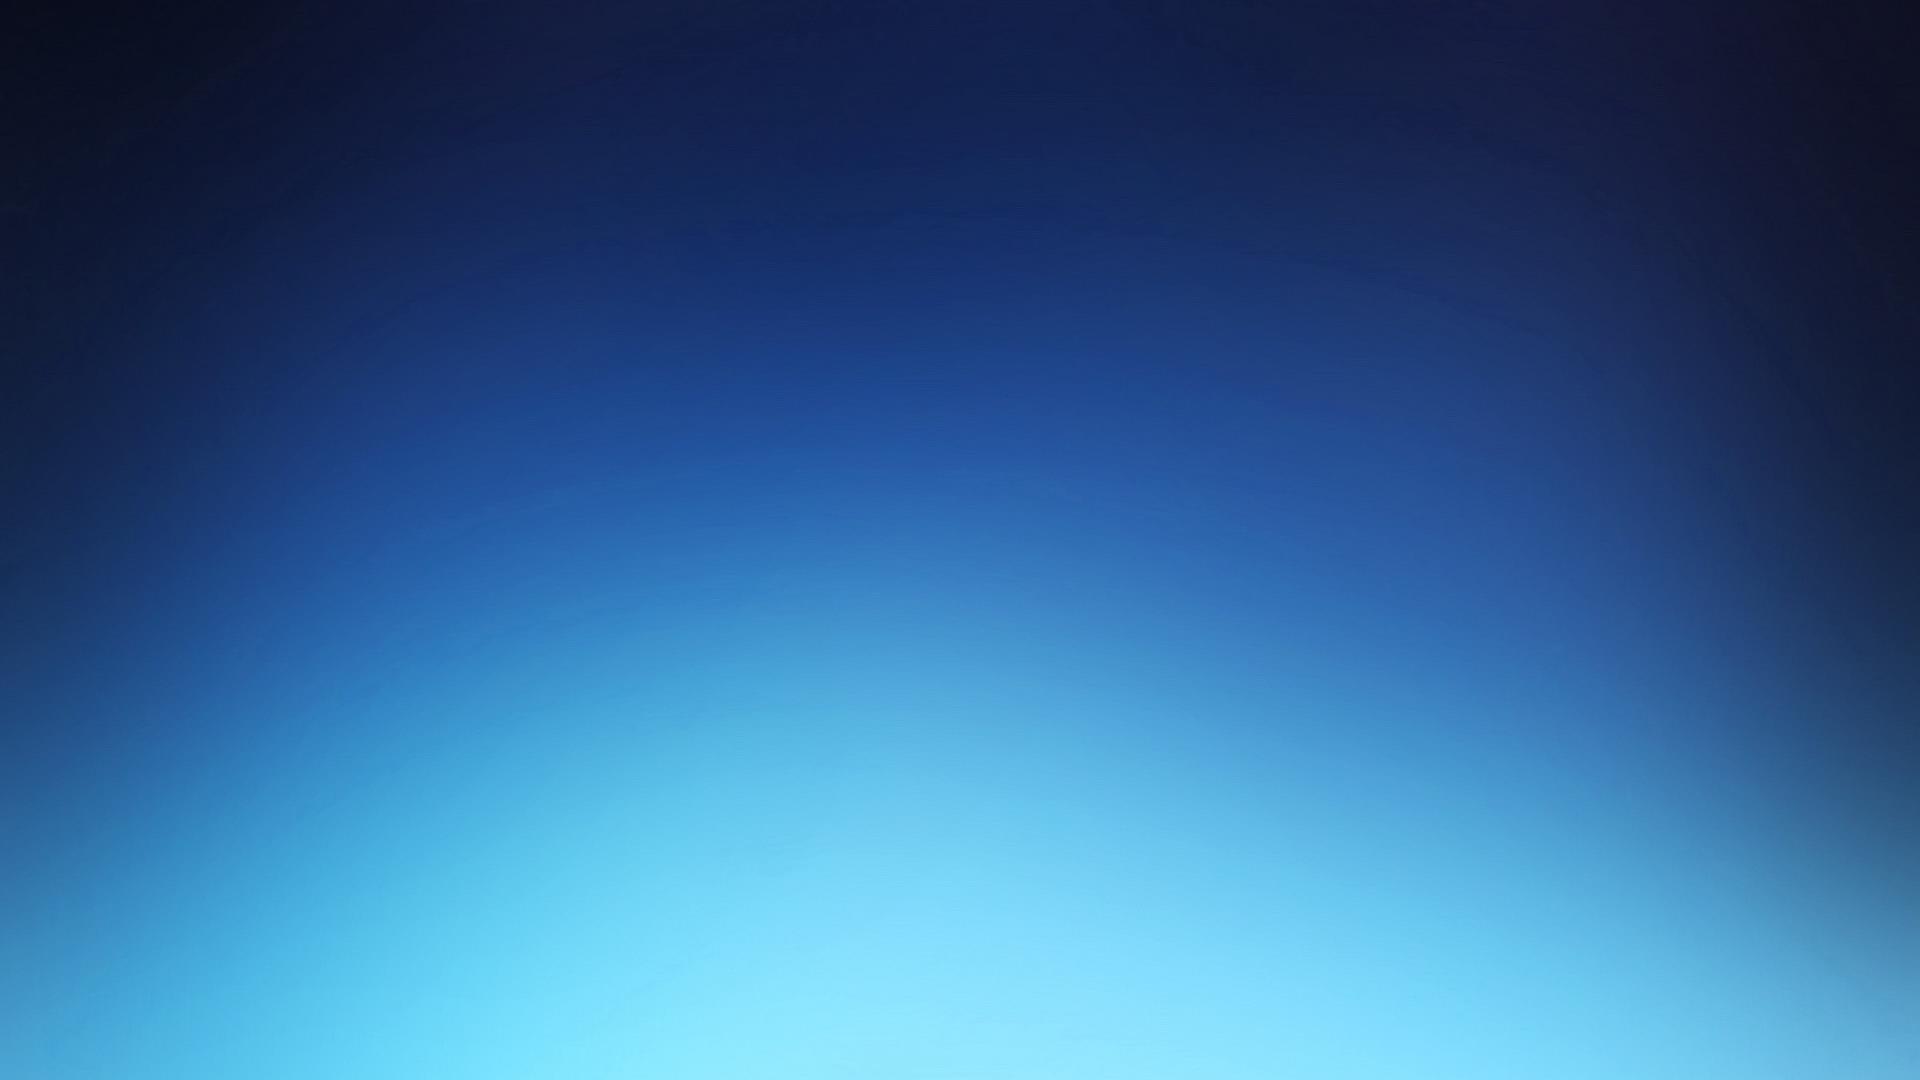 Background Blue Windwos Wallpaper Gradient Image System